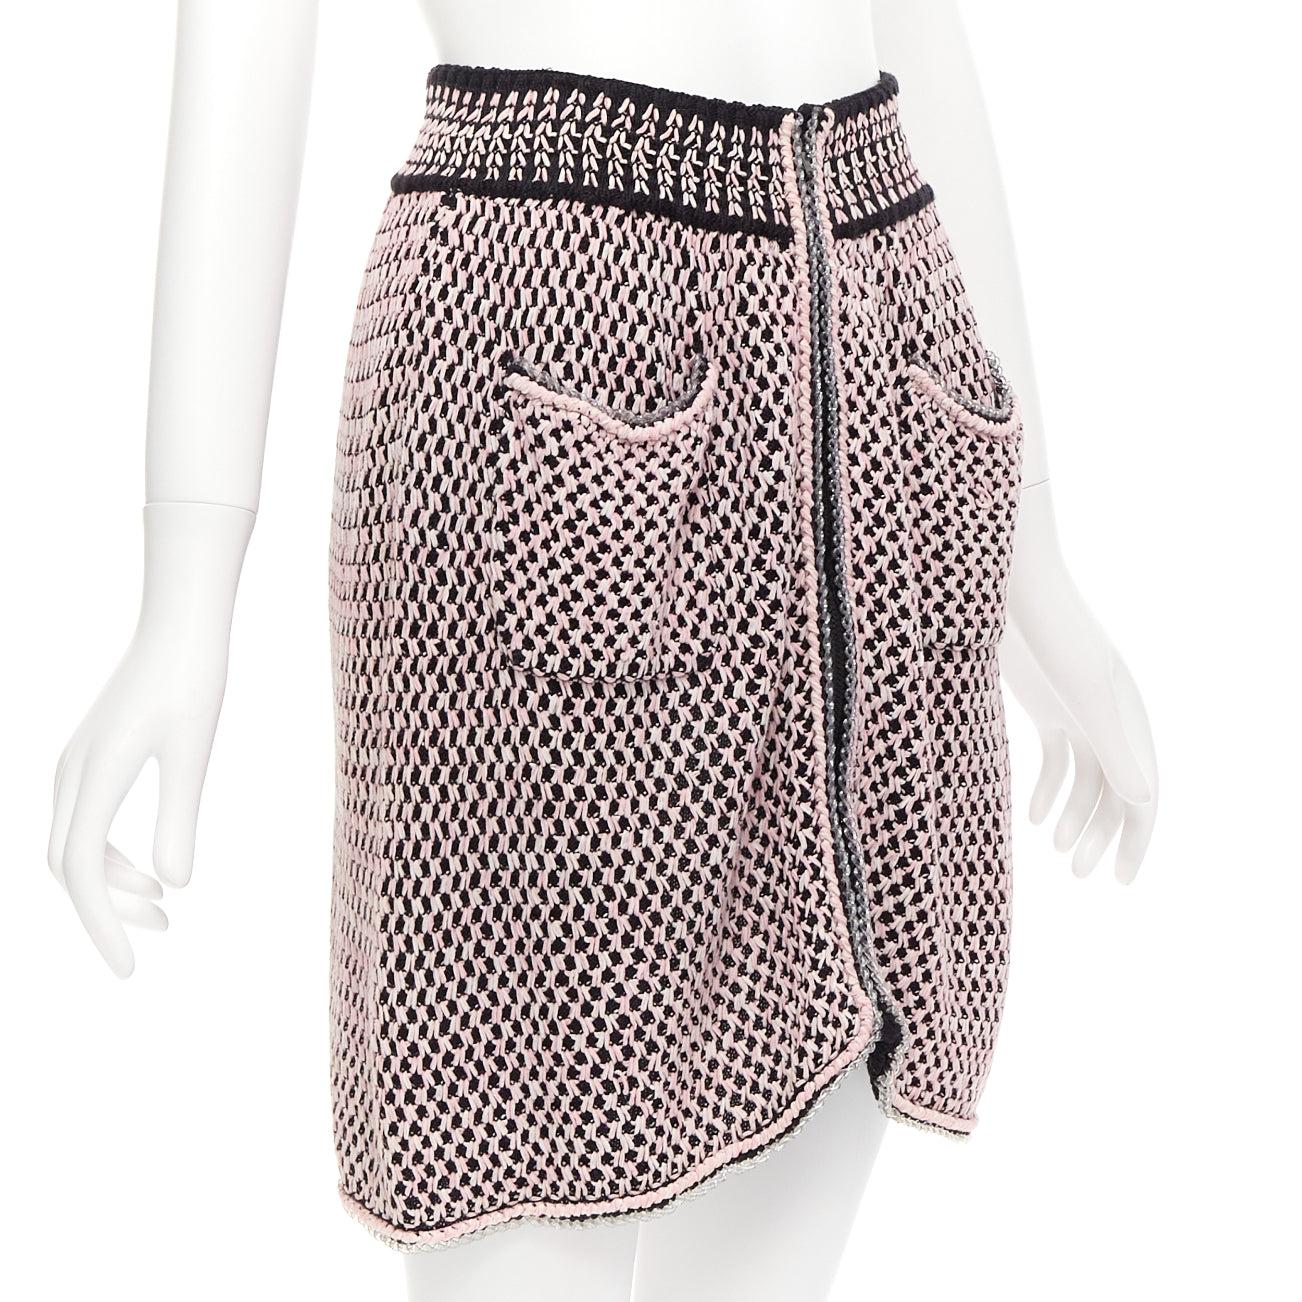 CHANEL black pink silk cotton blend tweed knit rubber braid trim skirt FR36 S
Reference: TGAS/D00941
Brand: Chanel
Designer: Karl Lagerfeld
Material: Silk, Cotton, Blend
Color: Pink, Black
Pattern: Tweed
Closure: Zip
Extra Details: Front and back